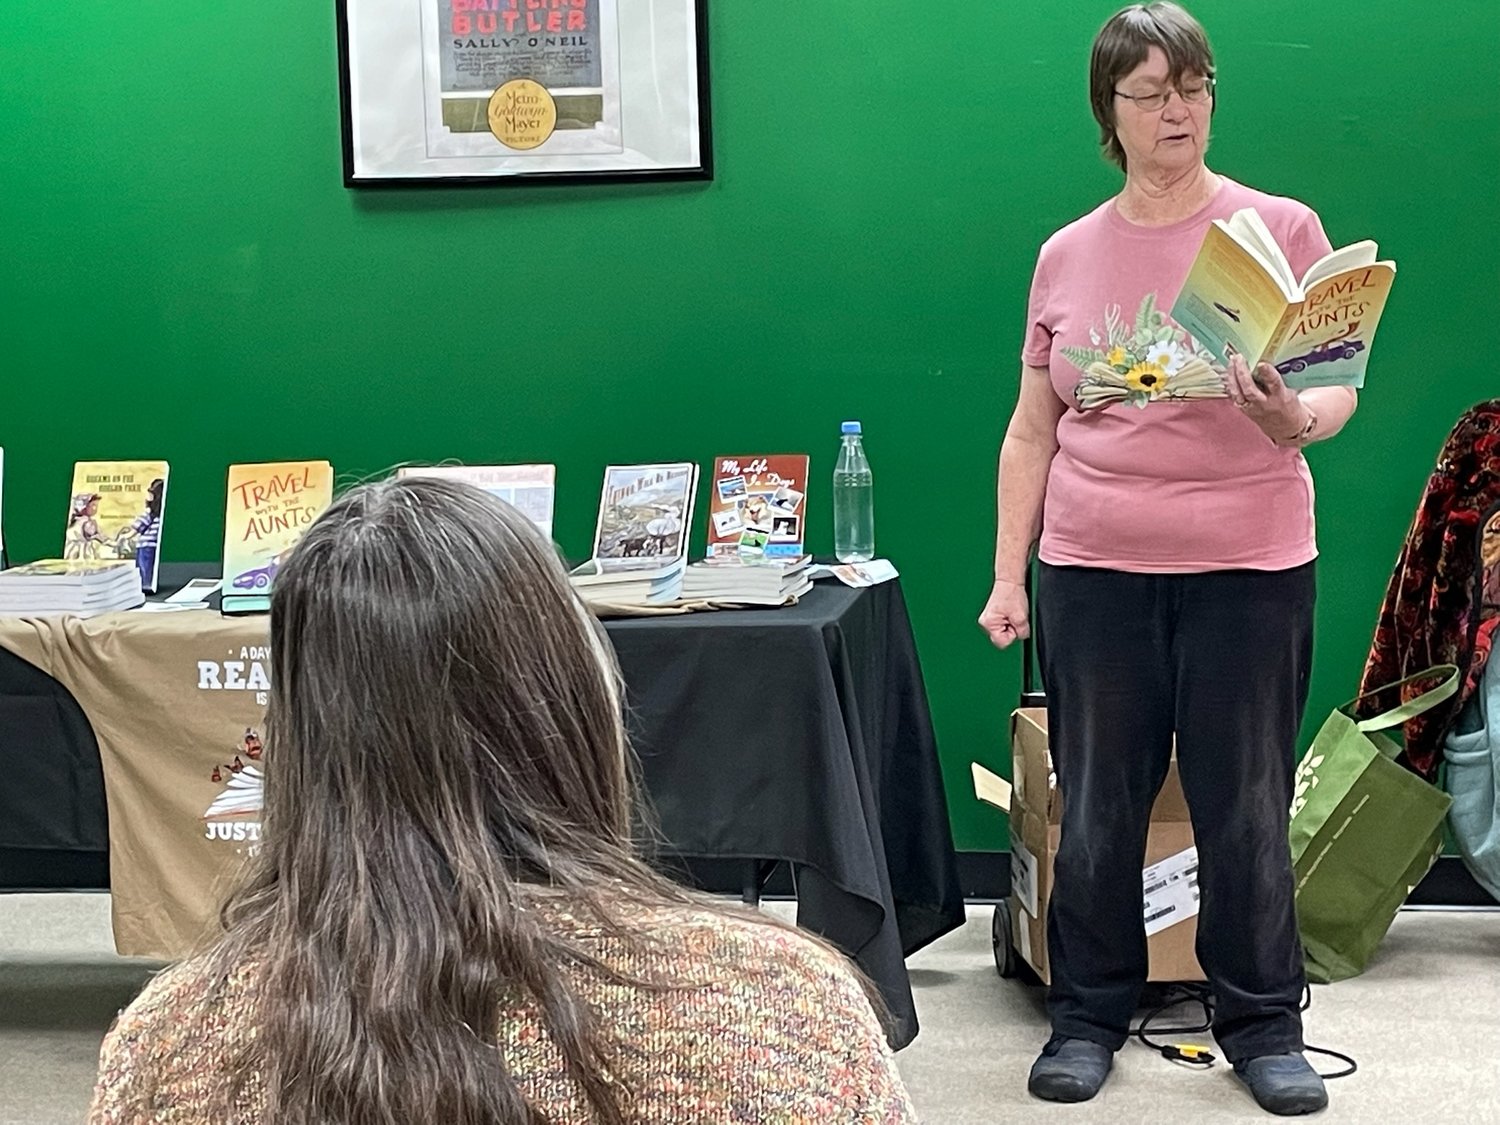 North Brookfield author and former elementary school teacher Barbara Linsley gives a talk on her latest book, "Travel with the Aunts," at Keaton & Lloyd Bookshop in Downtown Rome.